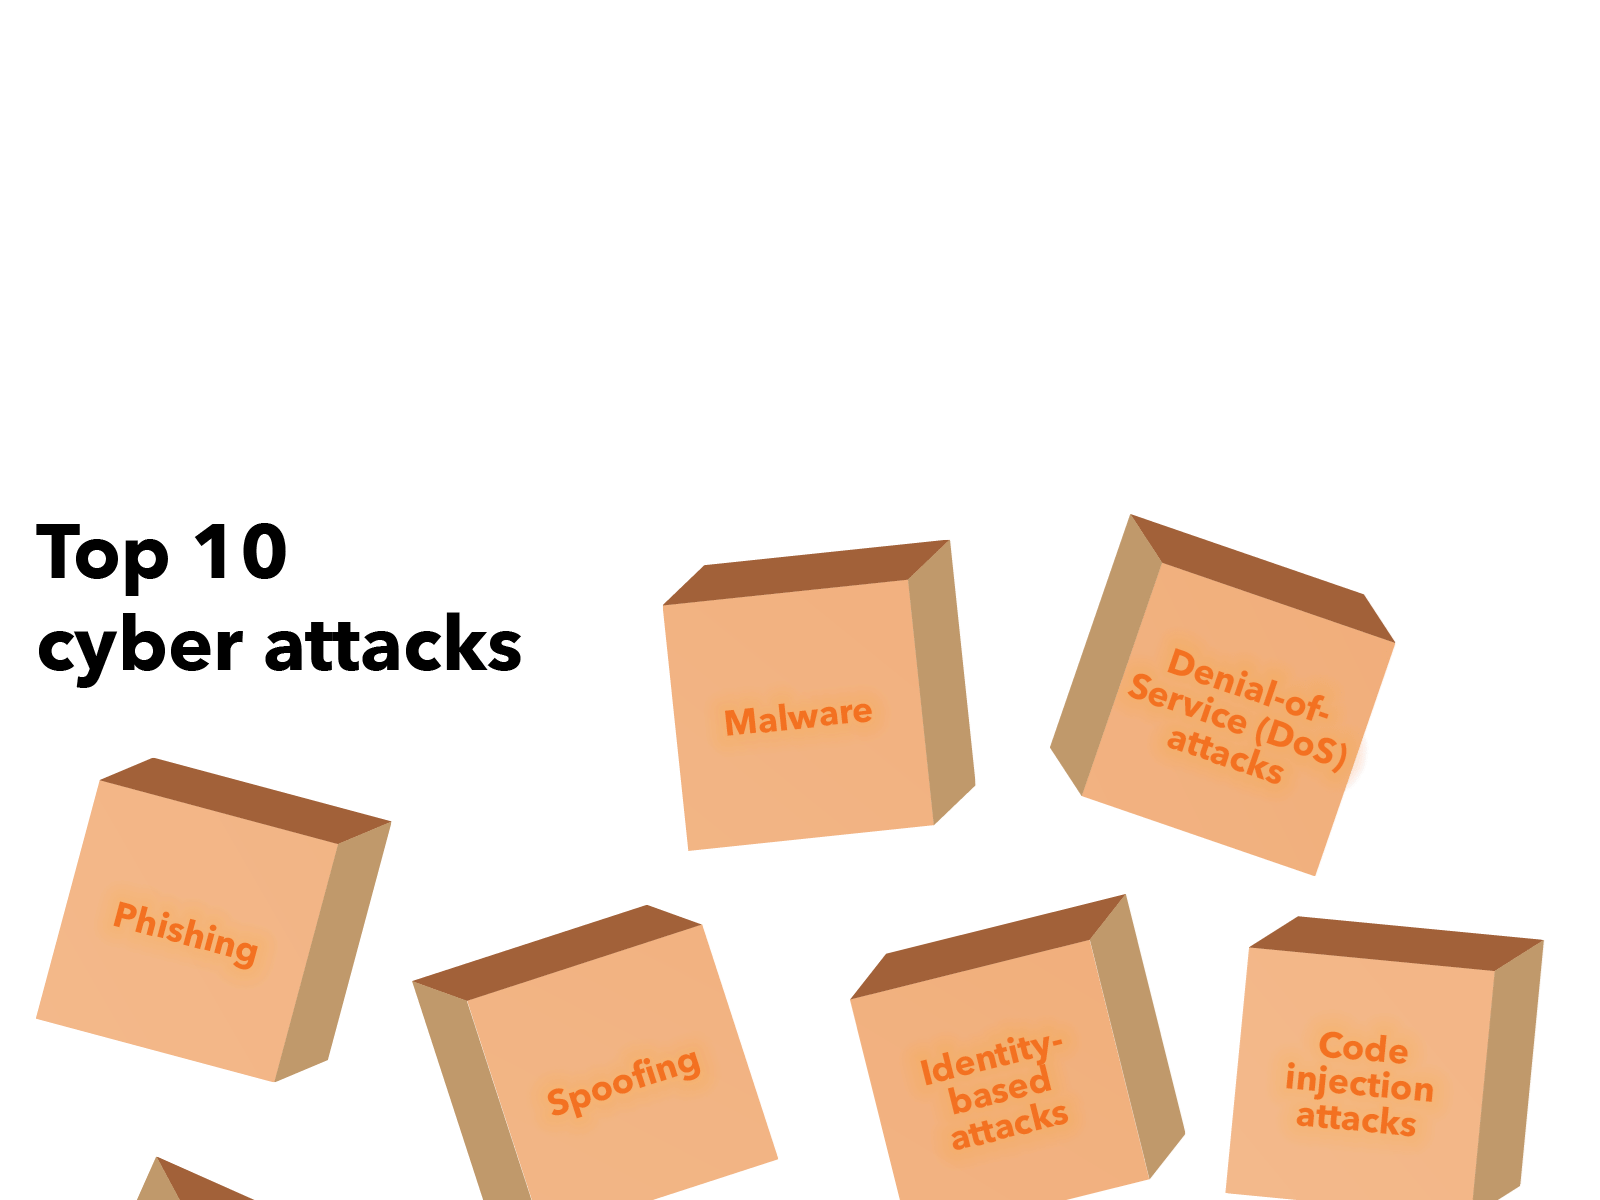 top 10 cyber attacks chart cubes building blocks orange malware phising spoofing